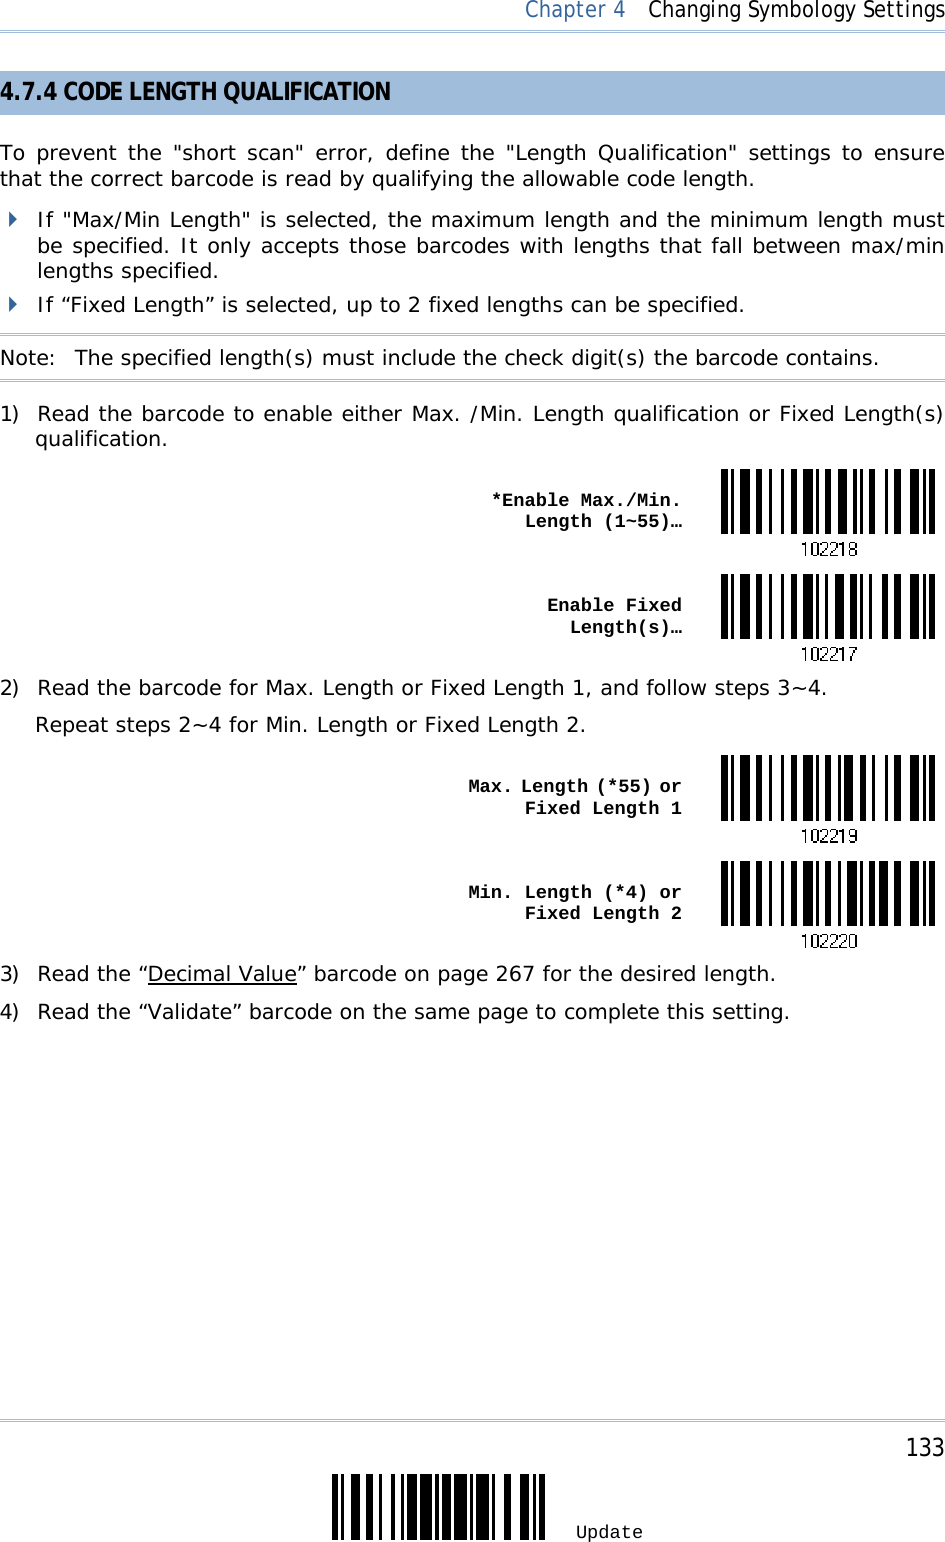     133 Update  Chapter 4  Changing Symbology Settings 4.7.4 CODE LENGTH QUALIFICATION To prevent the &quot;short scan&quot; error, define the &quot;Length Qualification&quot; settings to ensure that the correct barcode is read by qualifying the allowable code length.  If &quot;Max/Min Length&quot; is selected, the maximum length and the minimum length must be specified. It only accepts those barcodes with lengths that fall between max/min lengths specified.  If “Fixed Length” is selected, up to 2 fixed lengths can be specified. Note:   The specified length(s) must include the check digit(s) the barcode contains. 1) Read the barcode to enable either Max. /Min. Length qualification or Fixed Length(s) qualification.  *Enable Max./Min. Length (1~55)… Enable Fixed Length(s)…2) Read the barcode for Max. Length or Fixed Length 1, and follow steps 3~4. Repeat steps 2~4 for Min. Length or Fixed Length 2.  Max. Length (*55) or Fixed Length 1 Min. Length (*4) or Fixed Length 23) Read the “Decimal Value” barcode on page 267 for the desired length.  4) Read the “Validate” barcode on the same page to complete this setting.  